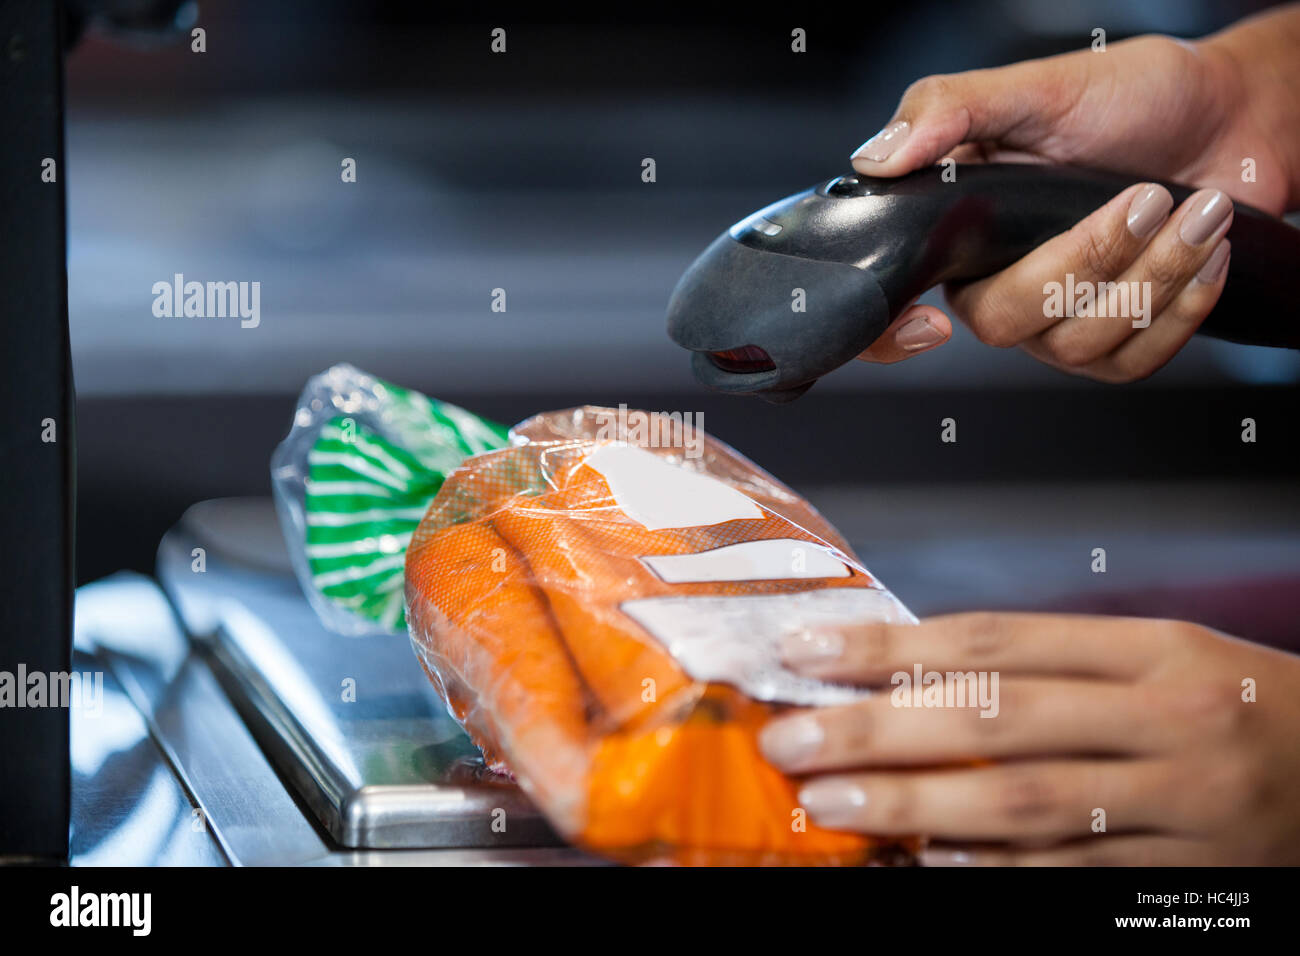 Woman scanning goods at checkout counter Stock Photo